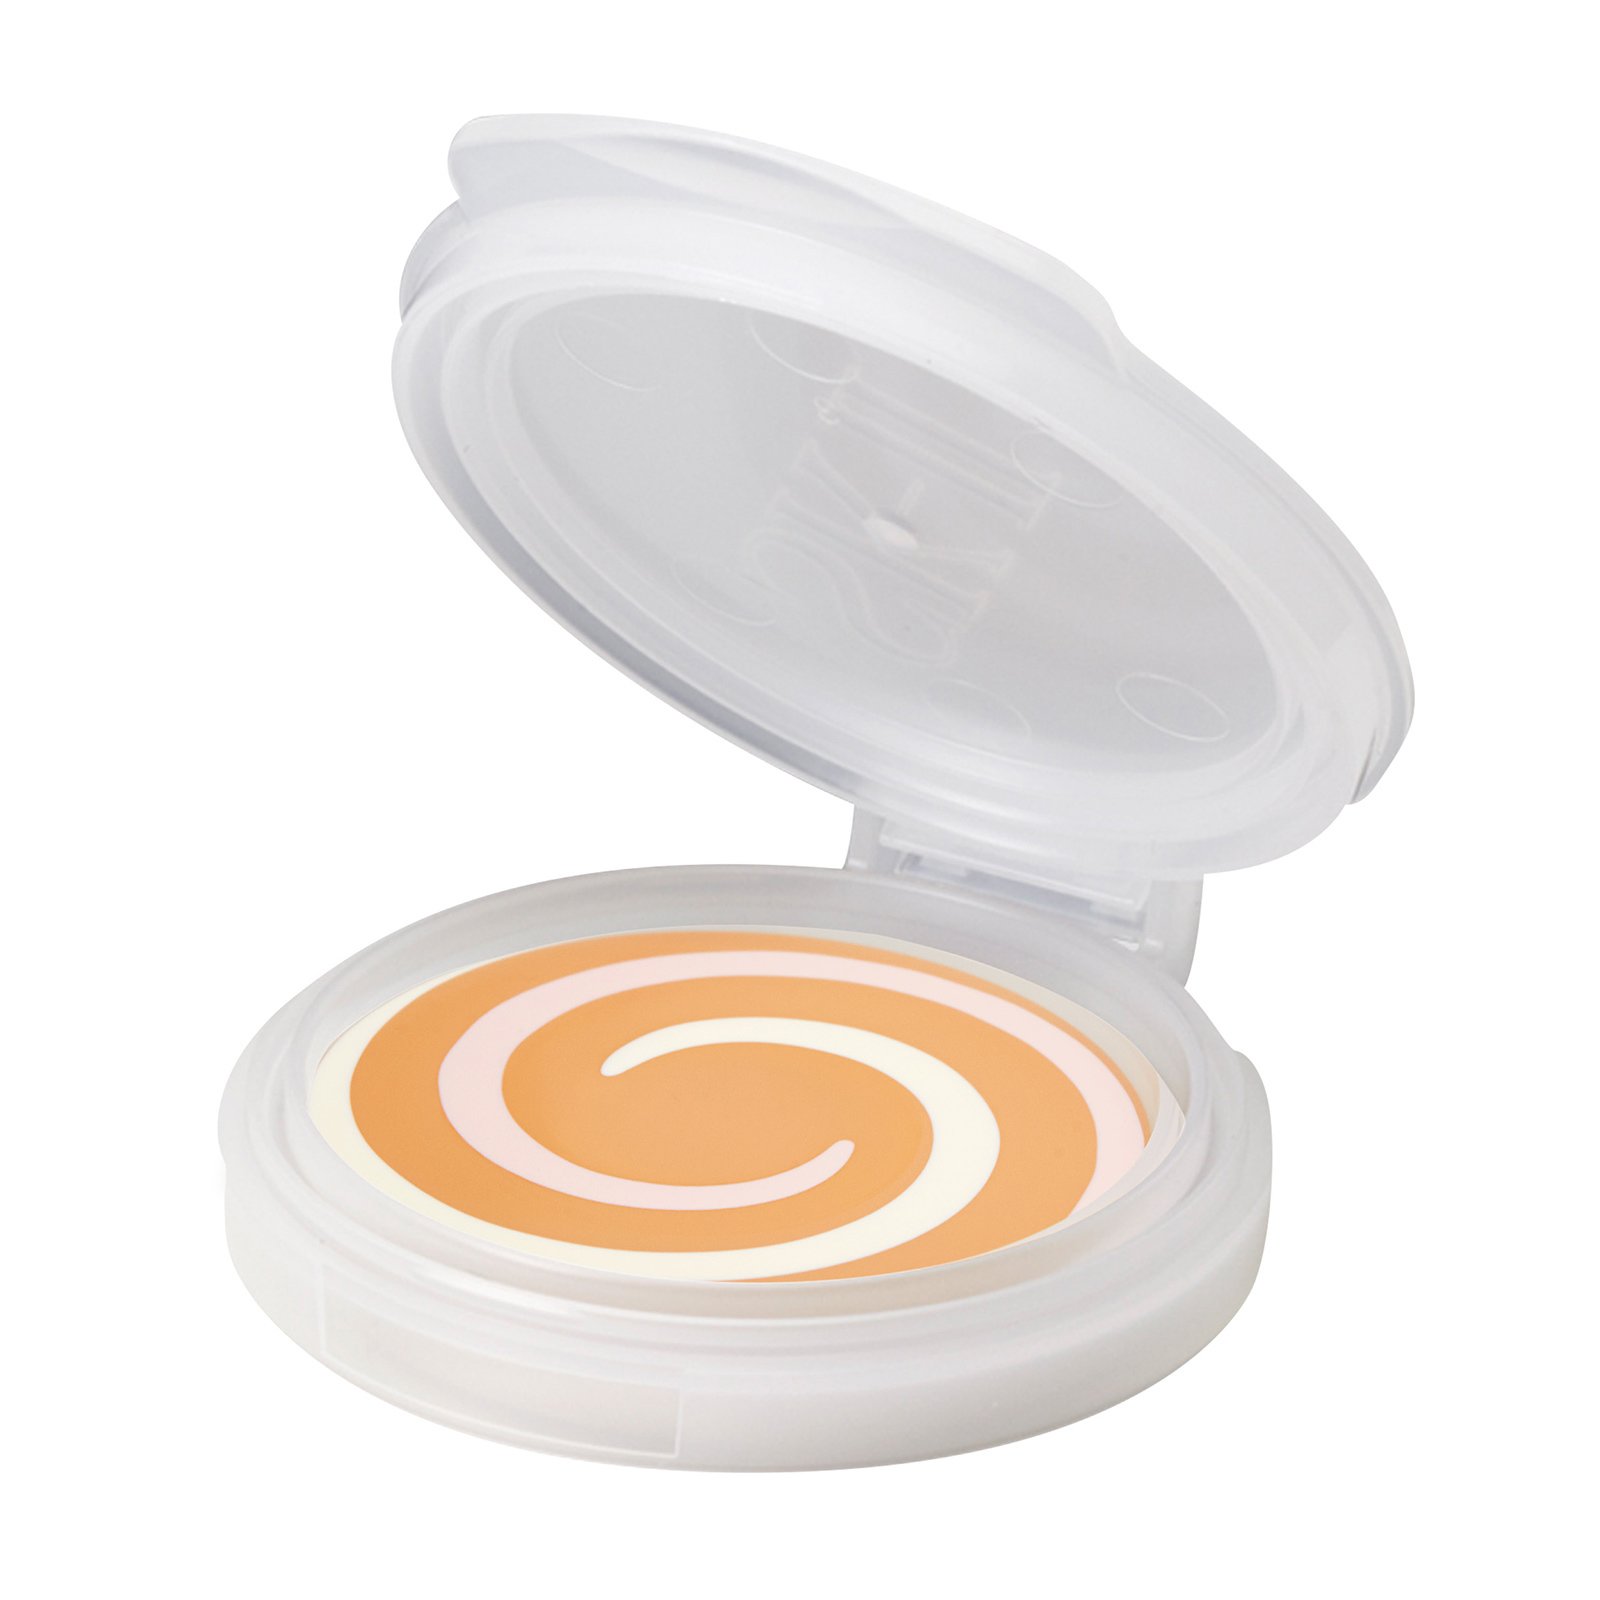 Clear Beauty Enamel Radiant Cream Compact SPF30 / PA+++ (Refill)